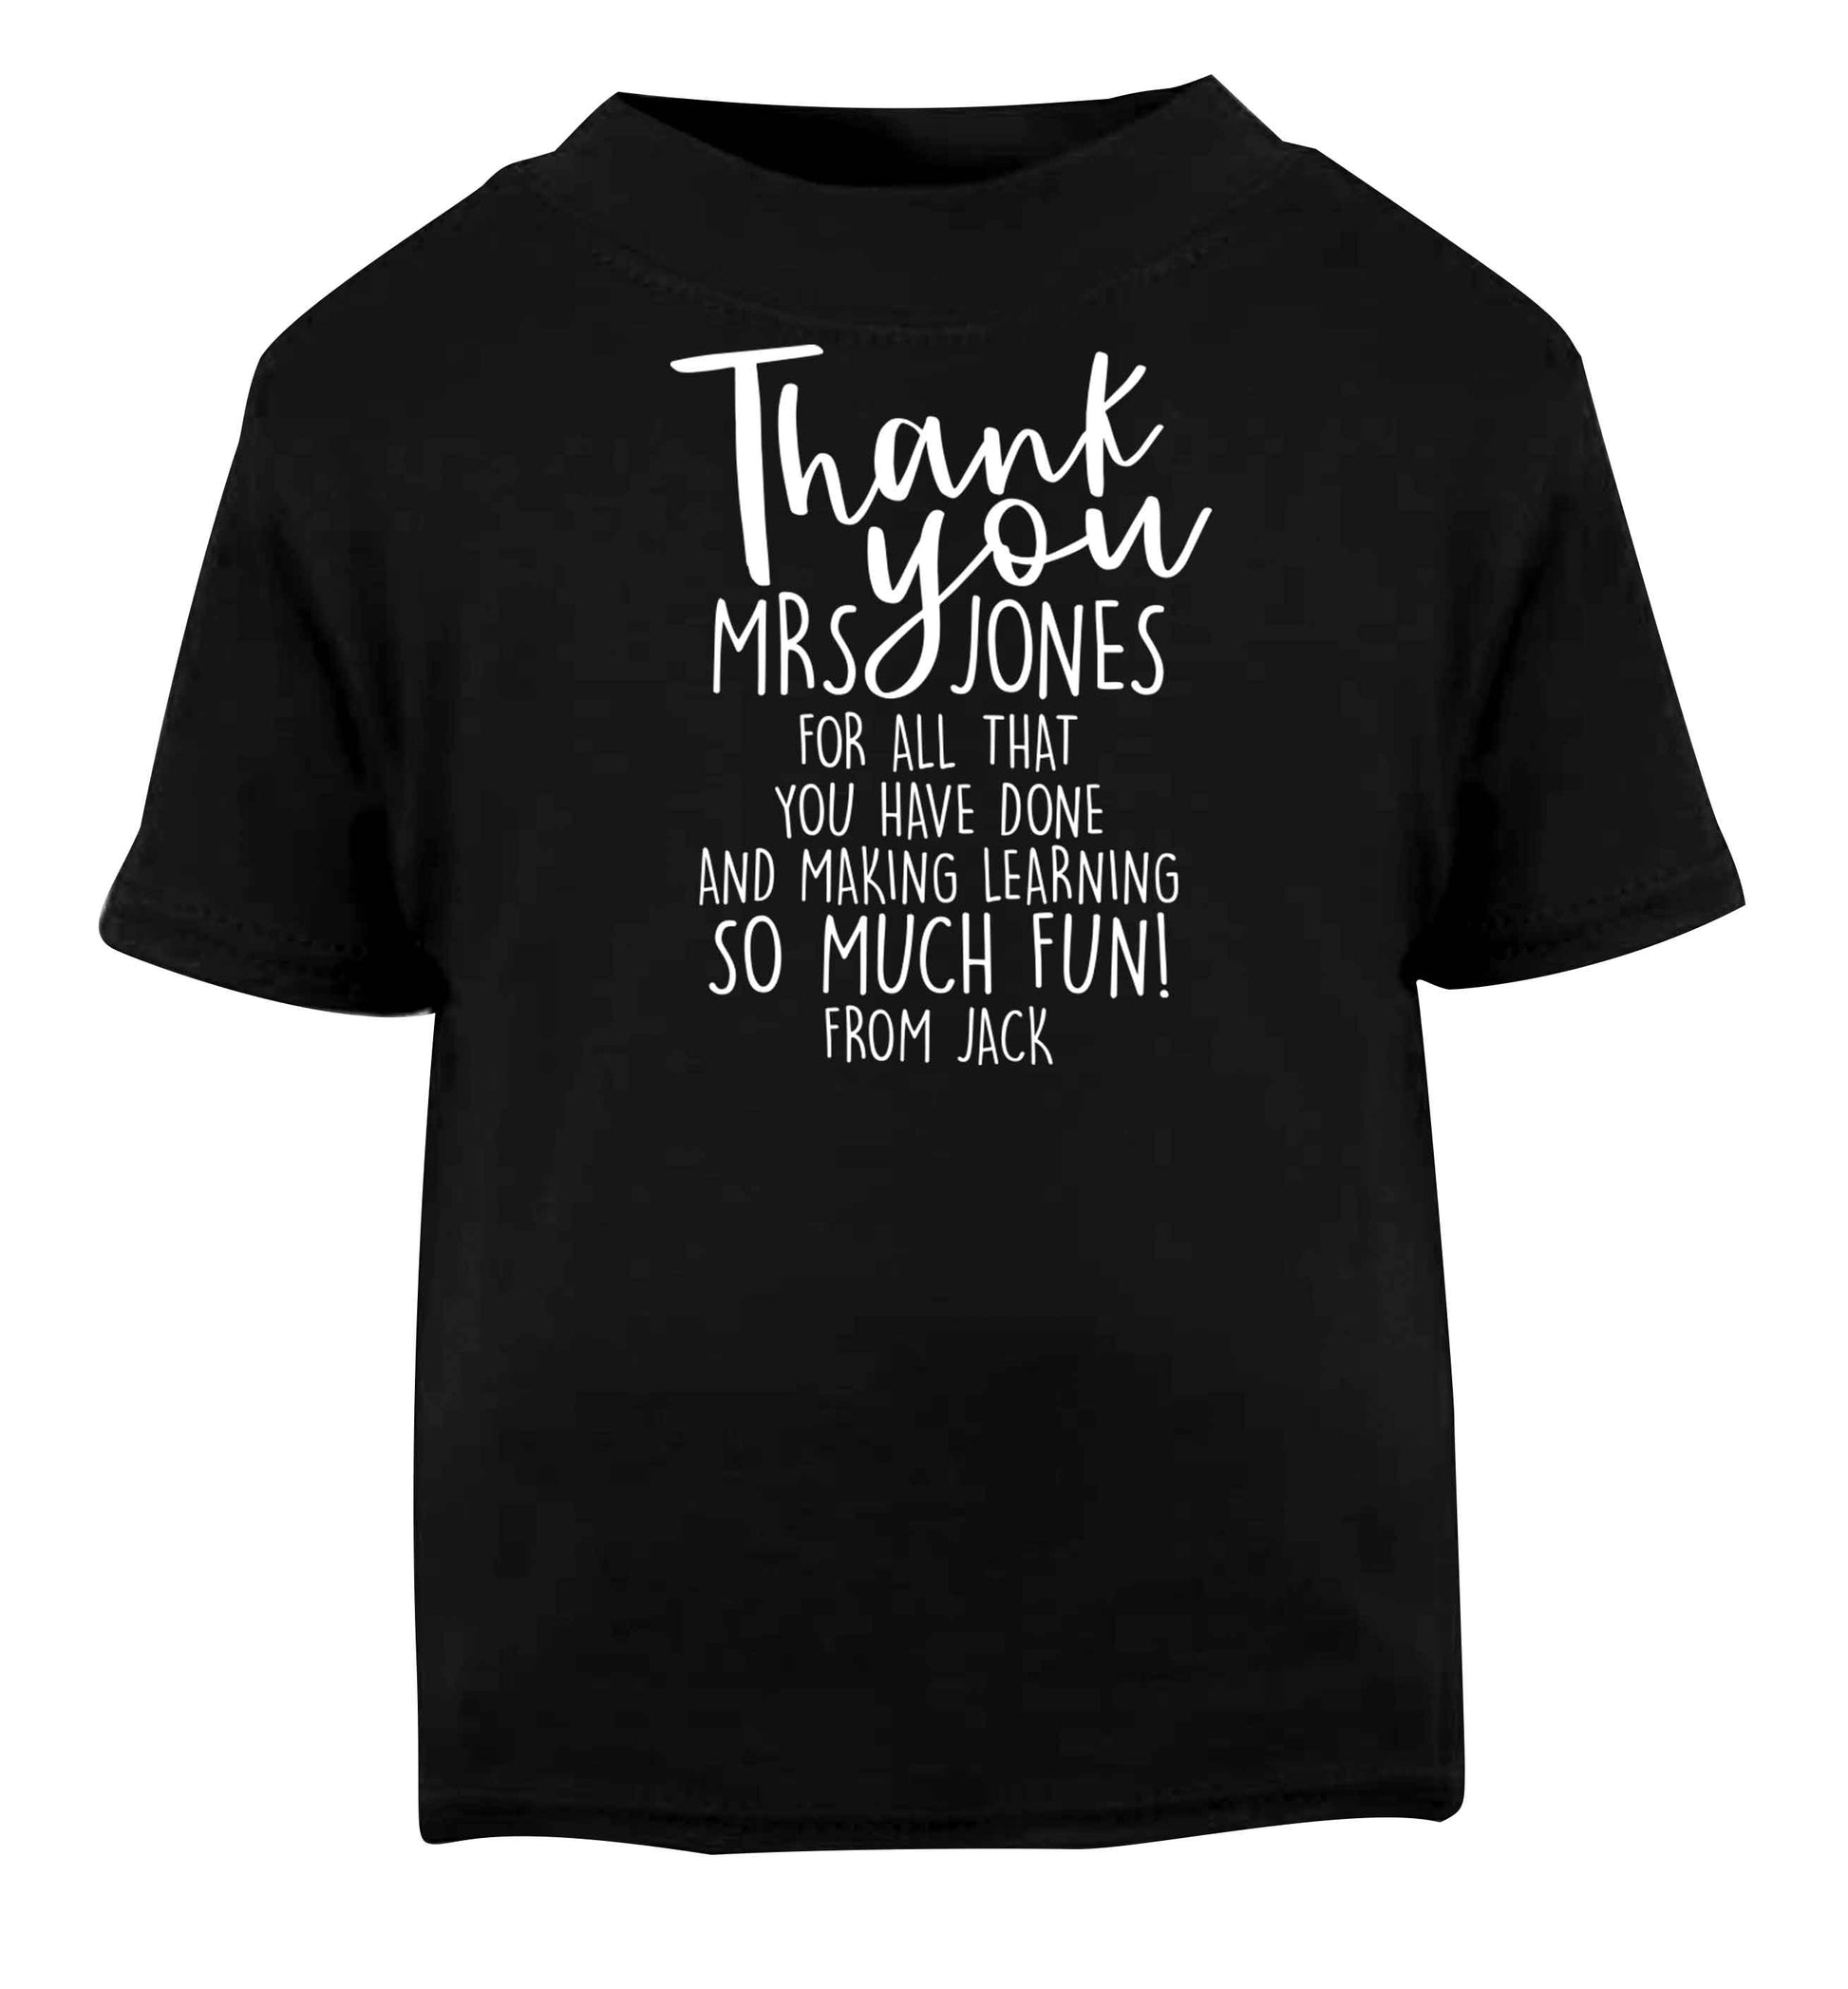 Personalised thank you teacher for all that you've done and making learning so much fun Black baby toddler Tshirt 2 years